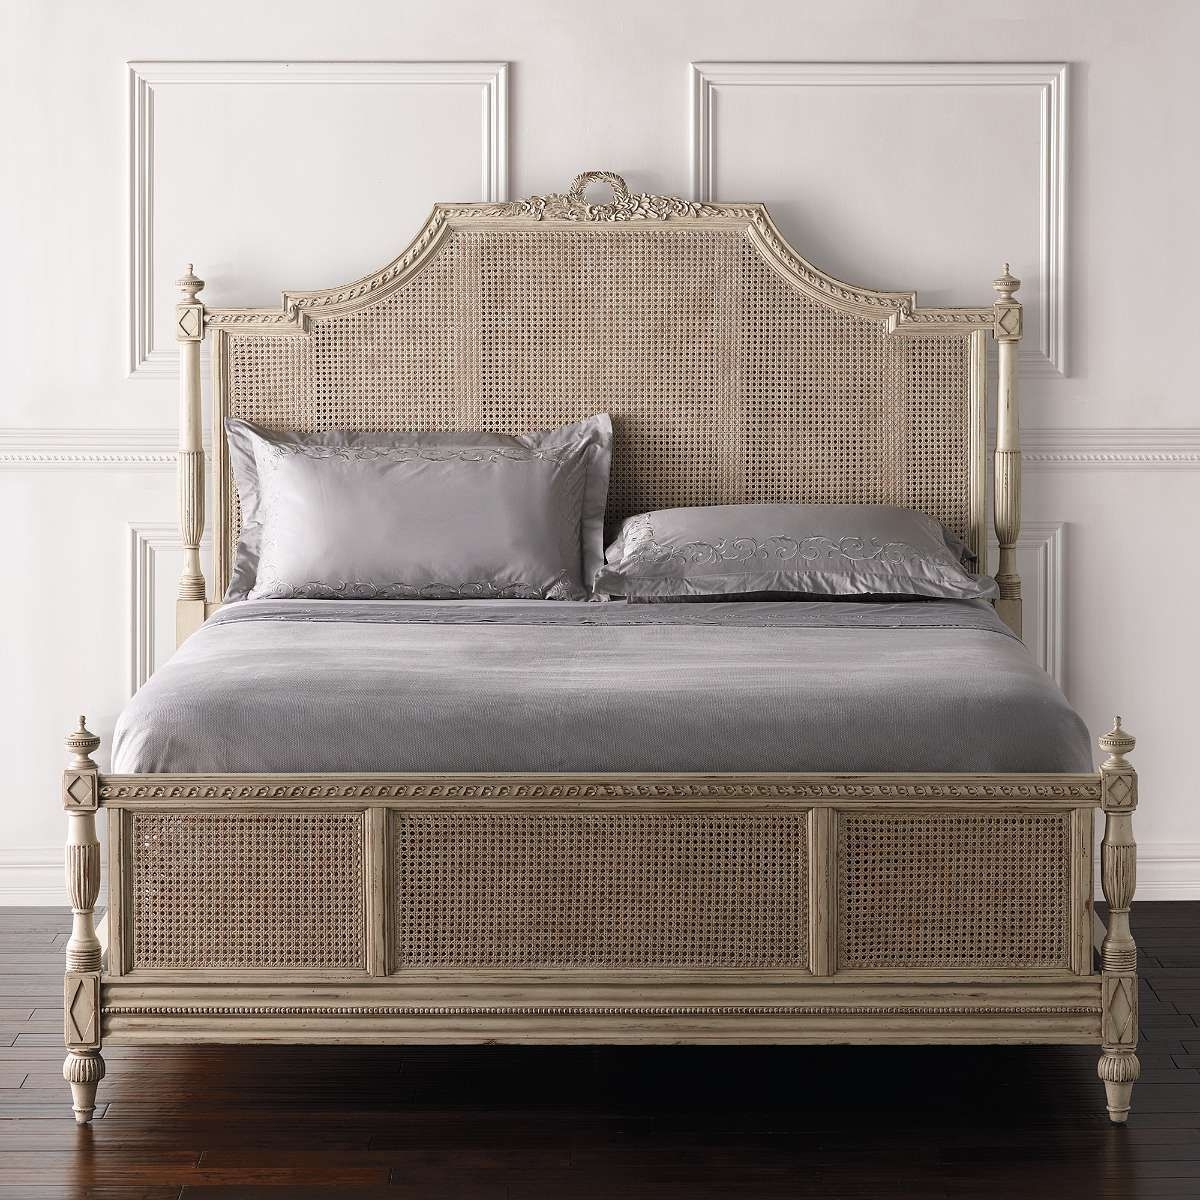 Antique french bedroom furniture